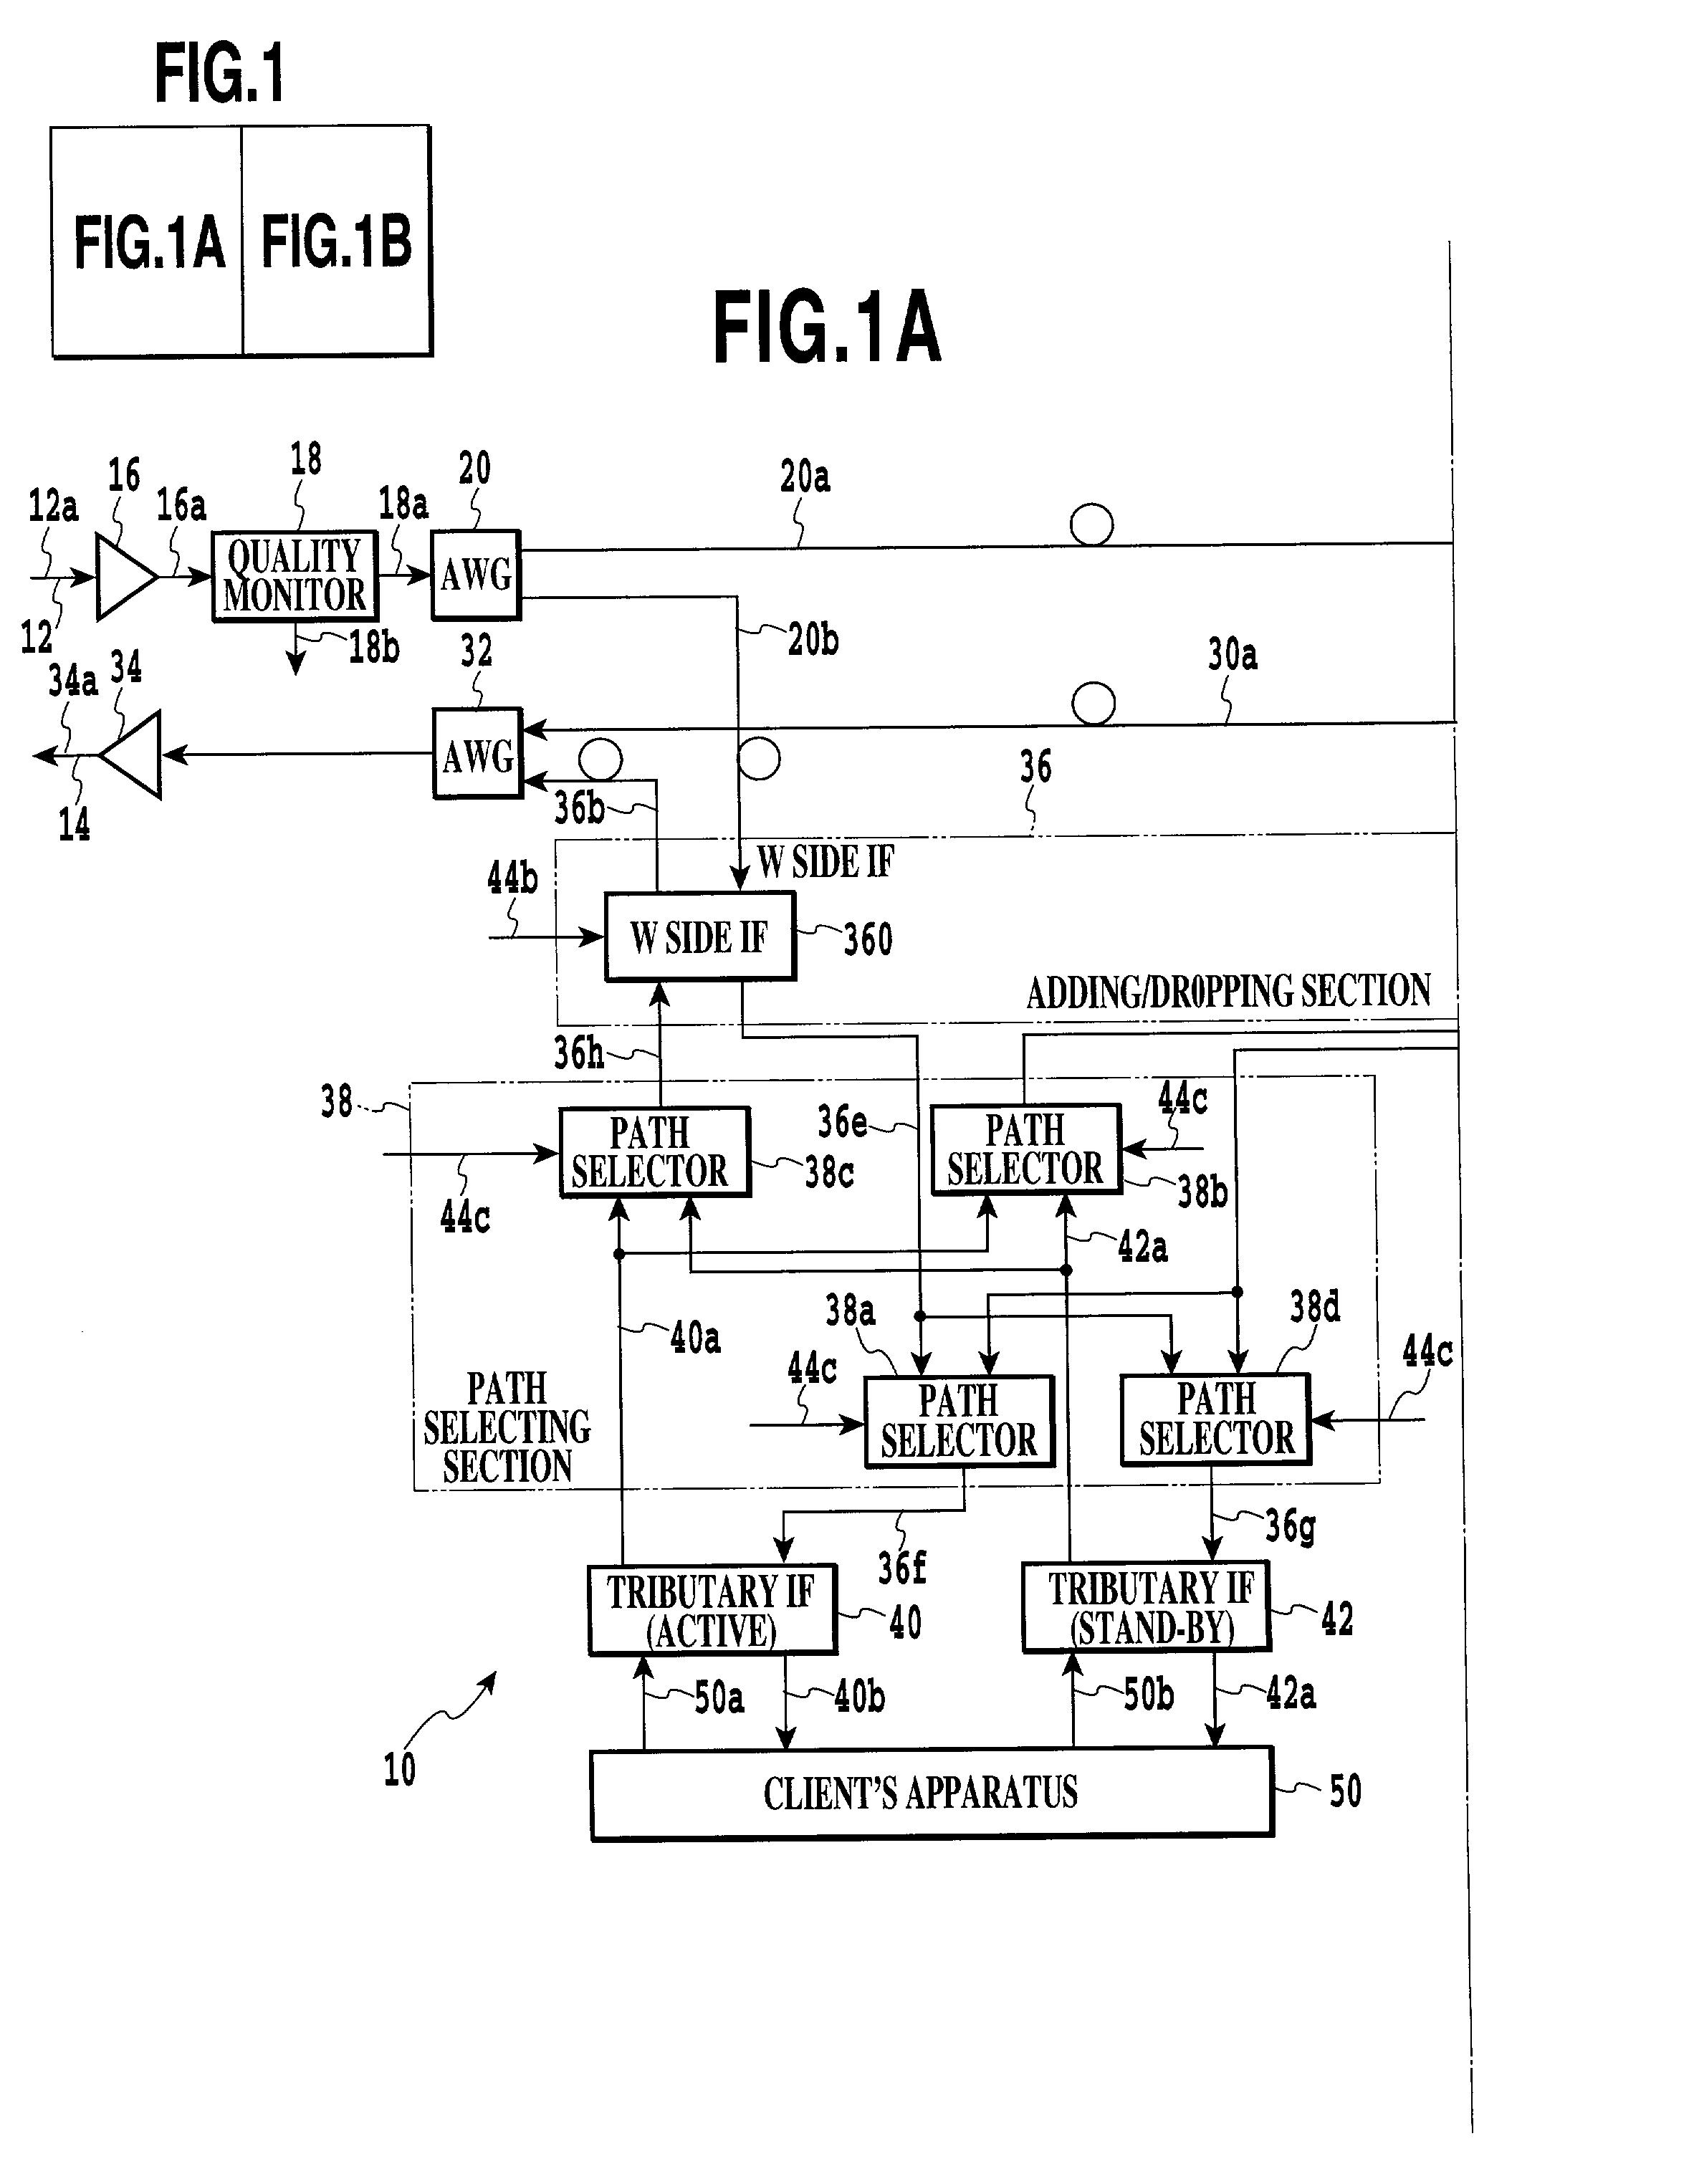 Optical transmission apparatus with an optimal routing and data transmitting capability and a method of determining an optimal route on optical transmission